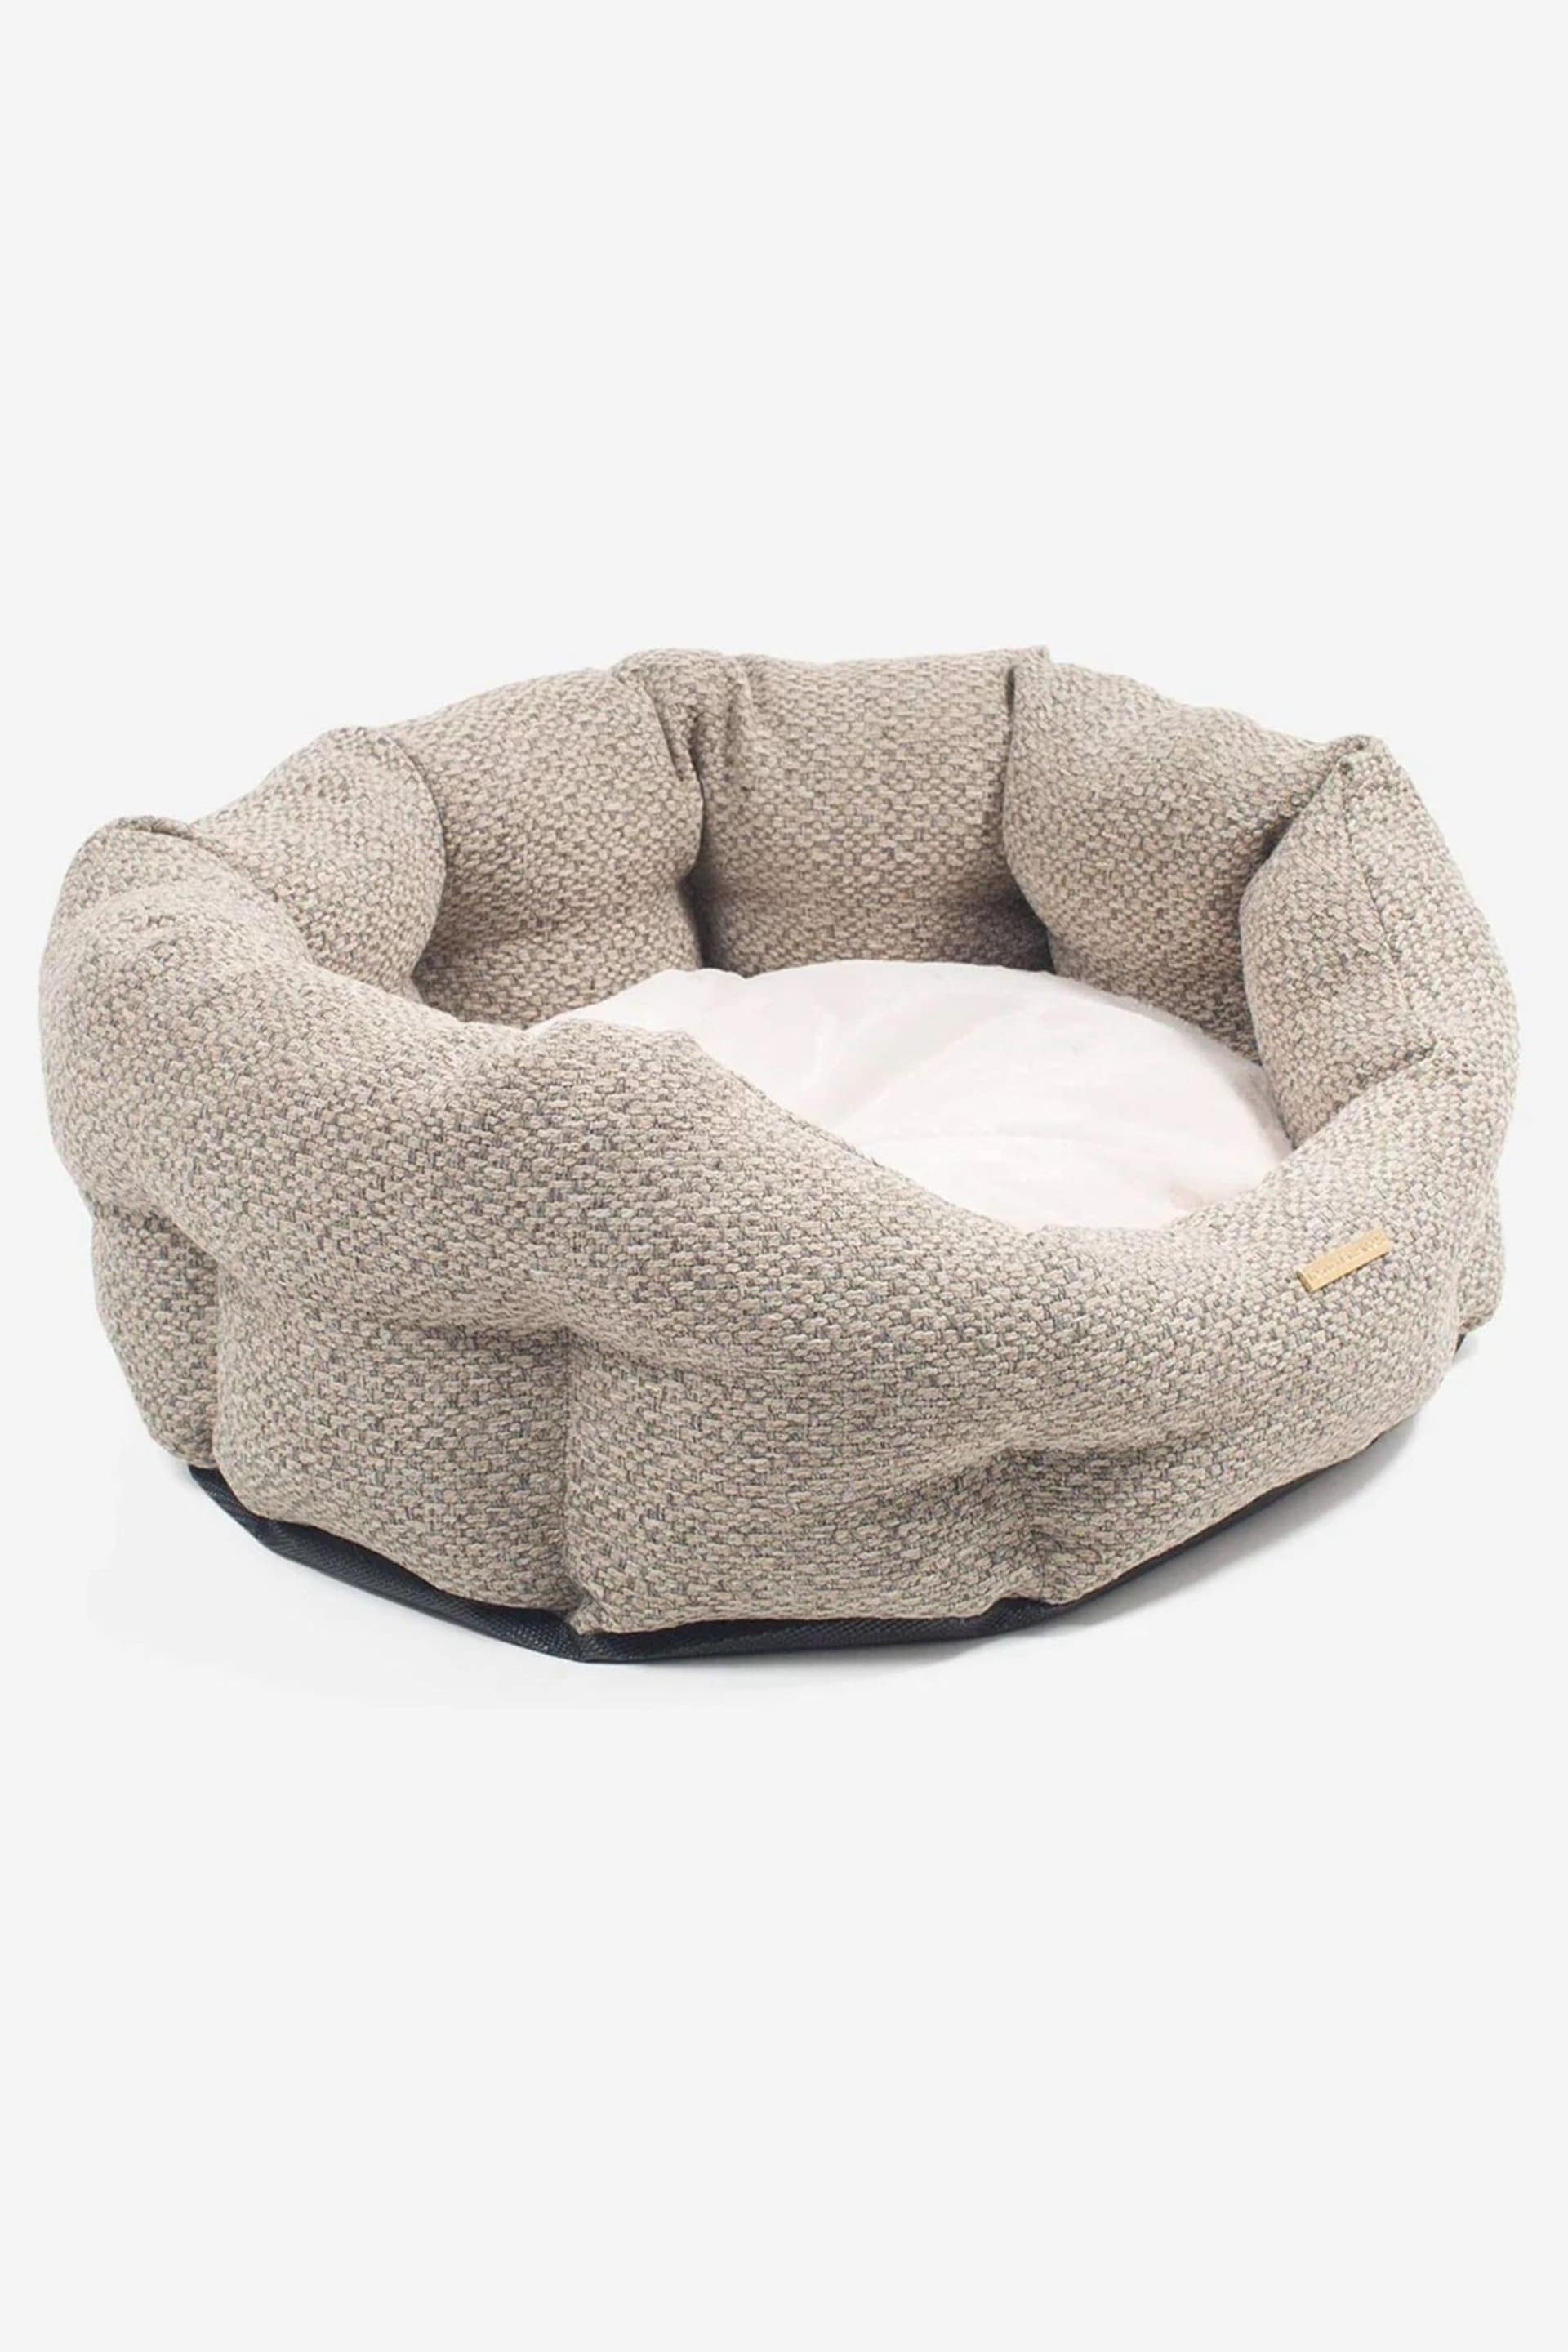 Lords and Labradors Light Grey Essentials Herdwick Oval Dog Bed - Image 6 of 6